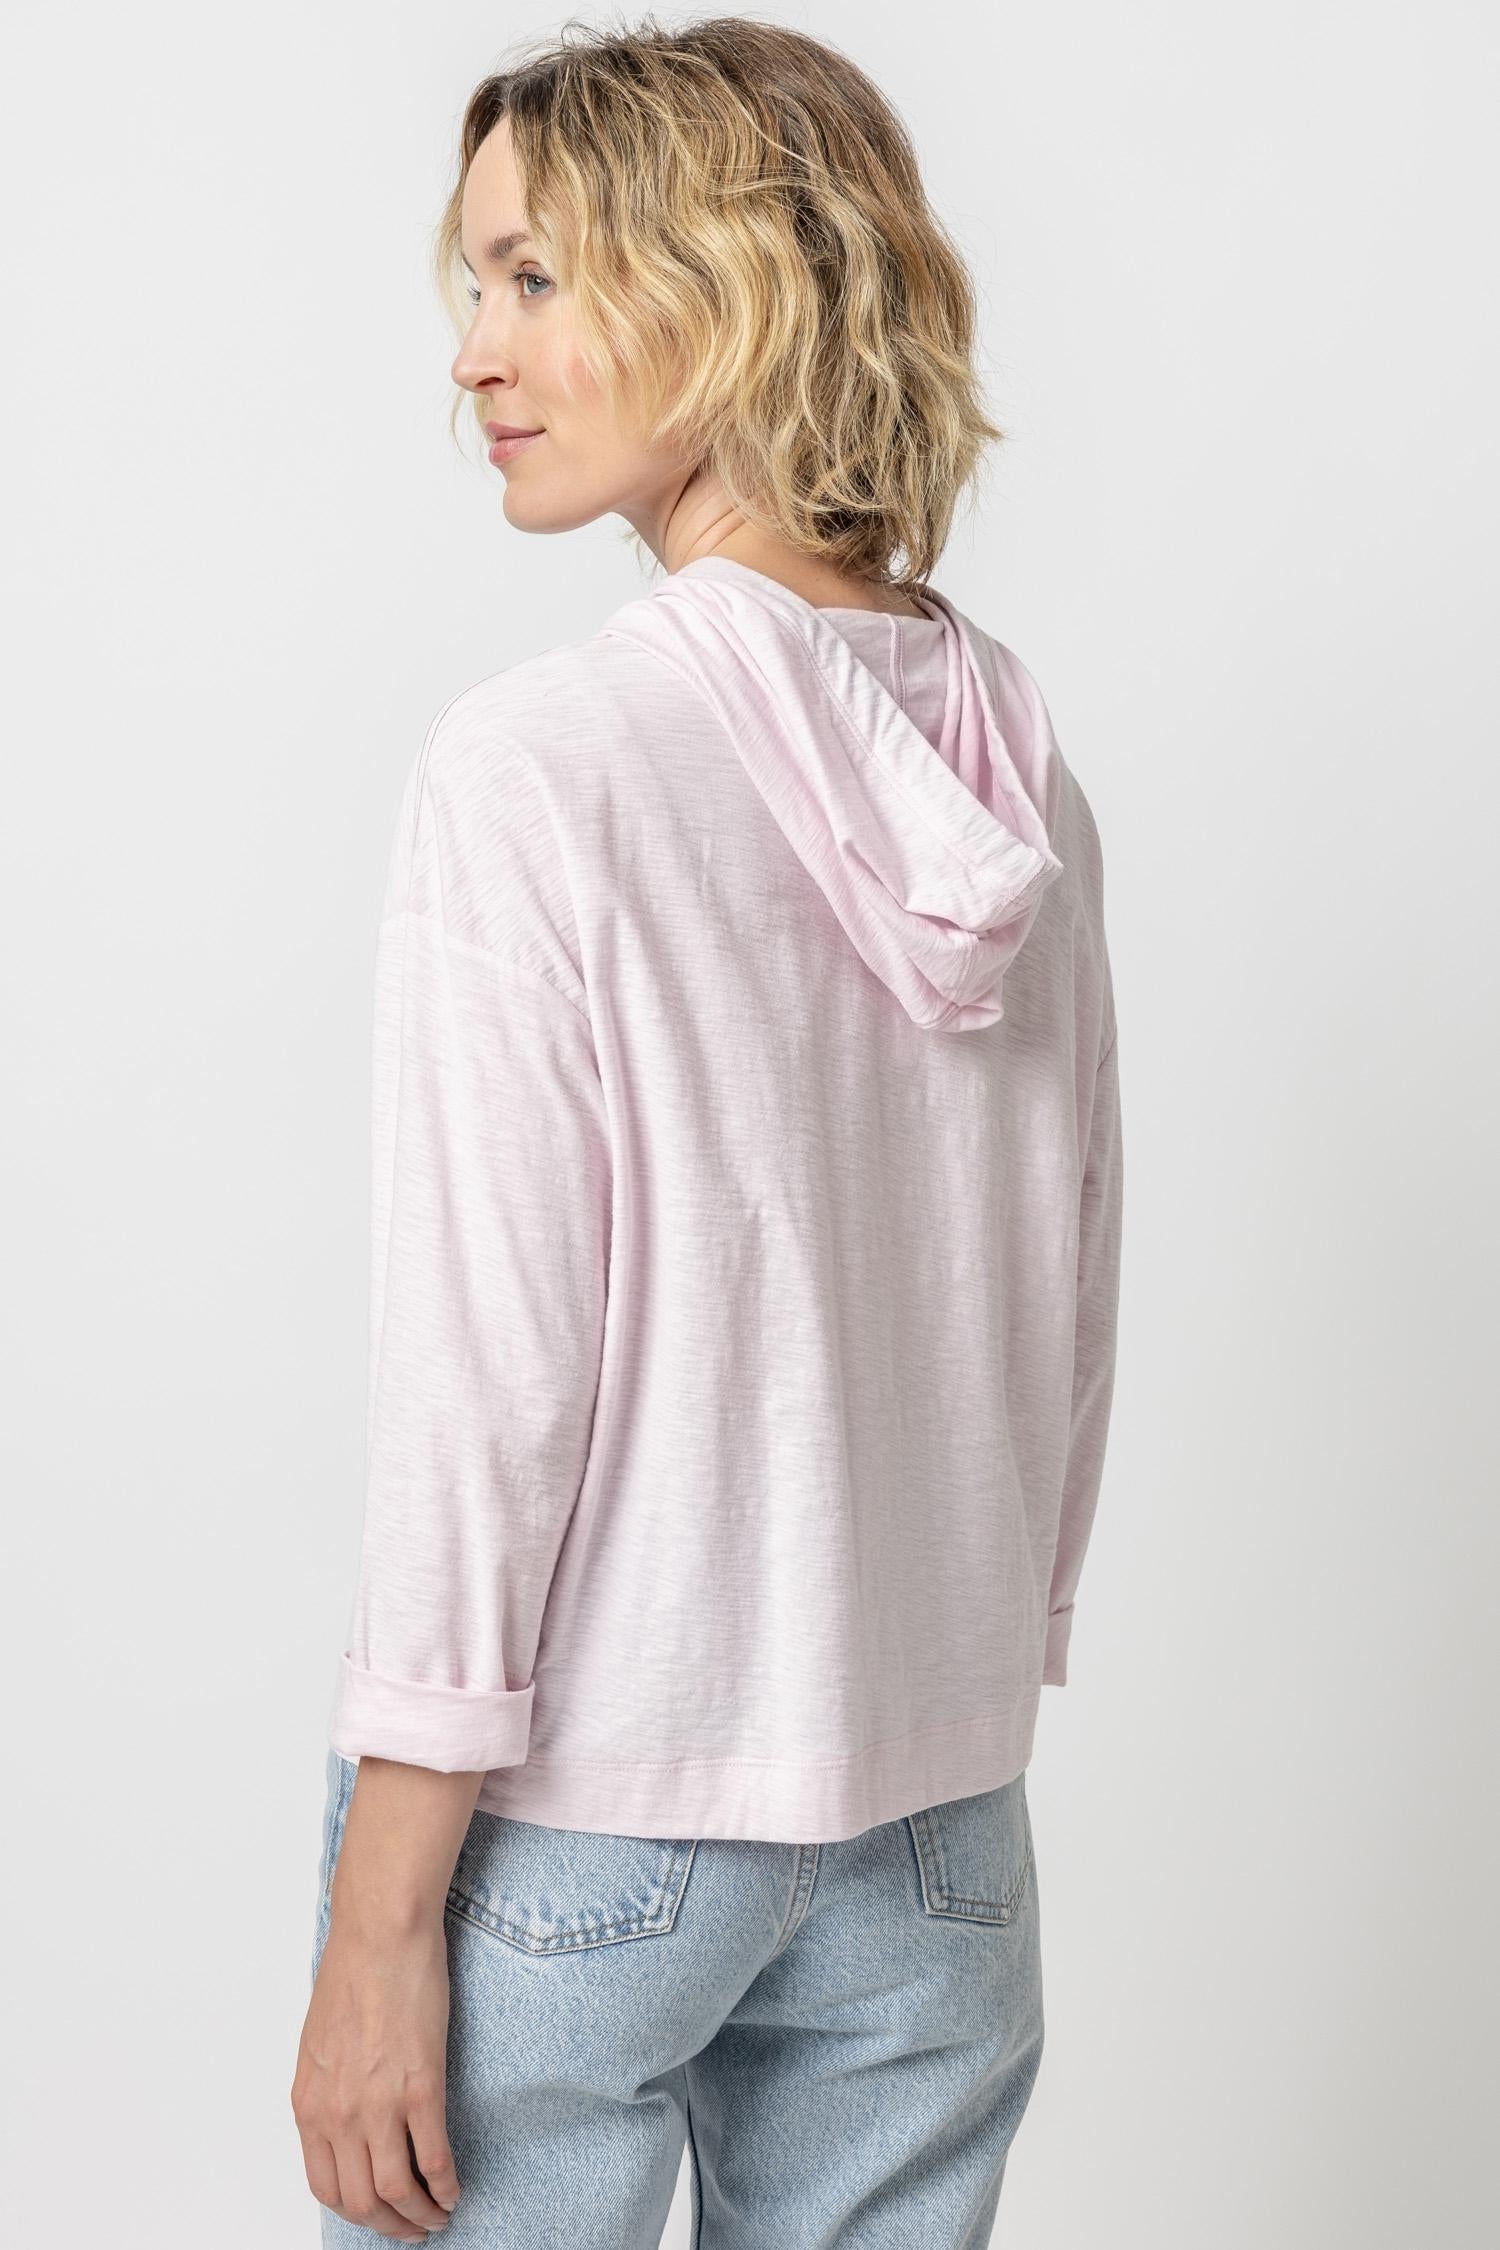 Lilla P Relaxed Hoodie - Petal Clothing - Tops - Shirts - LS Knits by Lilla P | Grace the Boutique